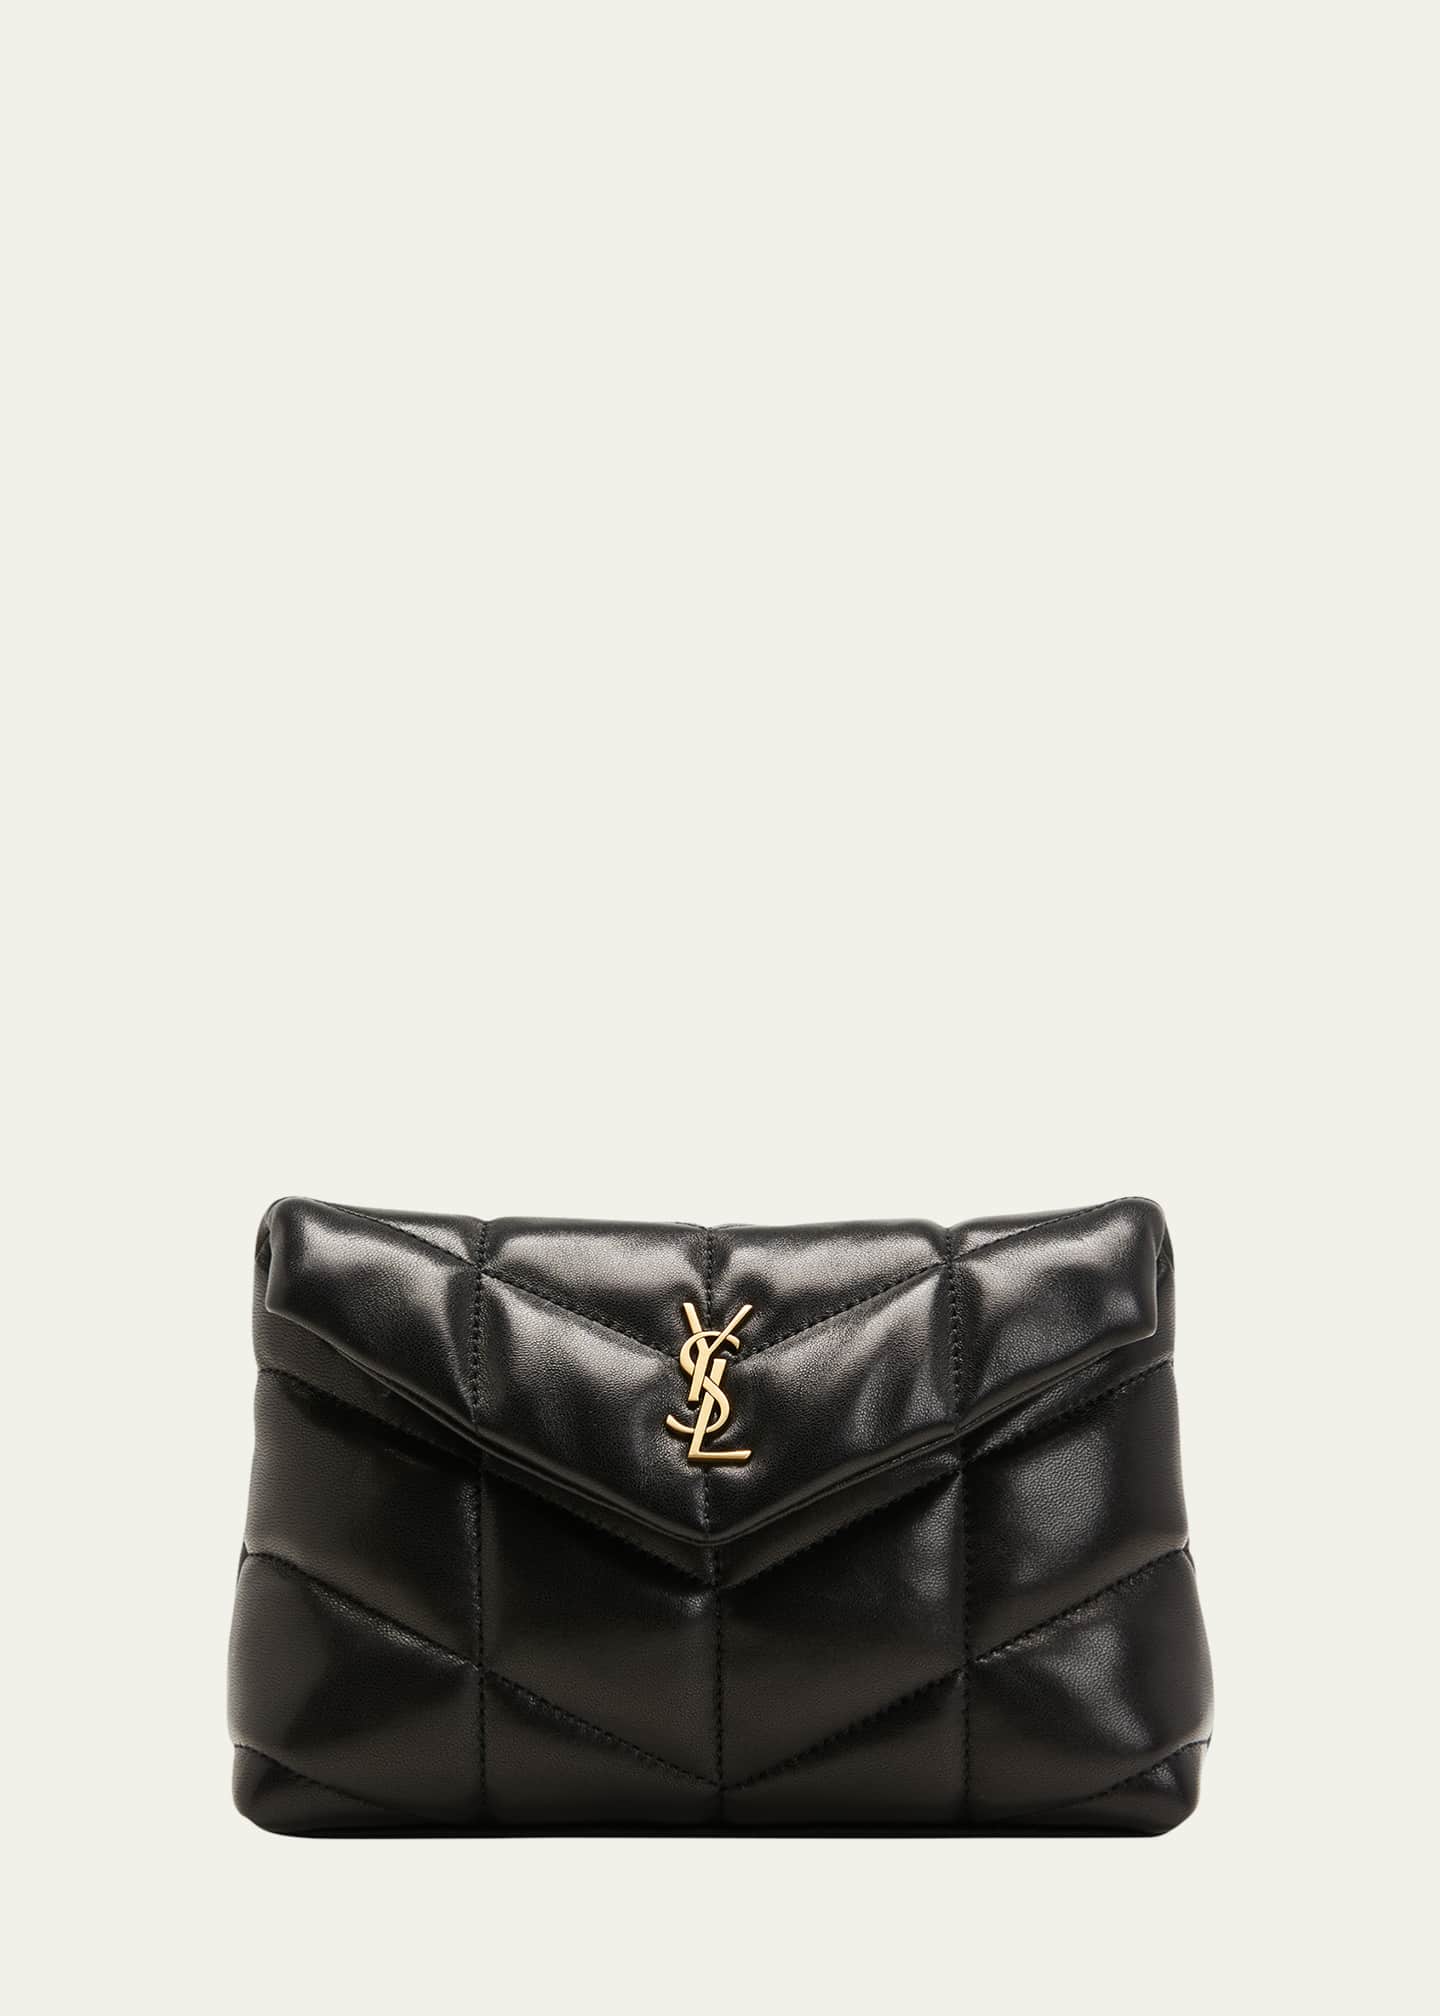 Saint Laurent Puffer Small Ysl Quilted Pouch Clutch Bag